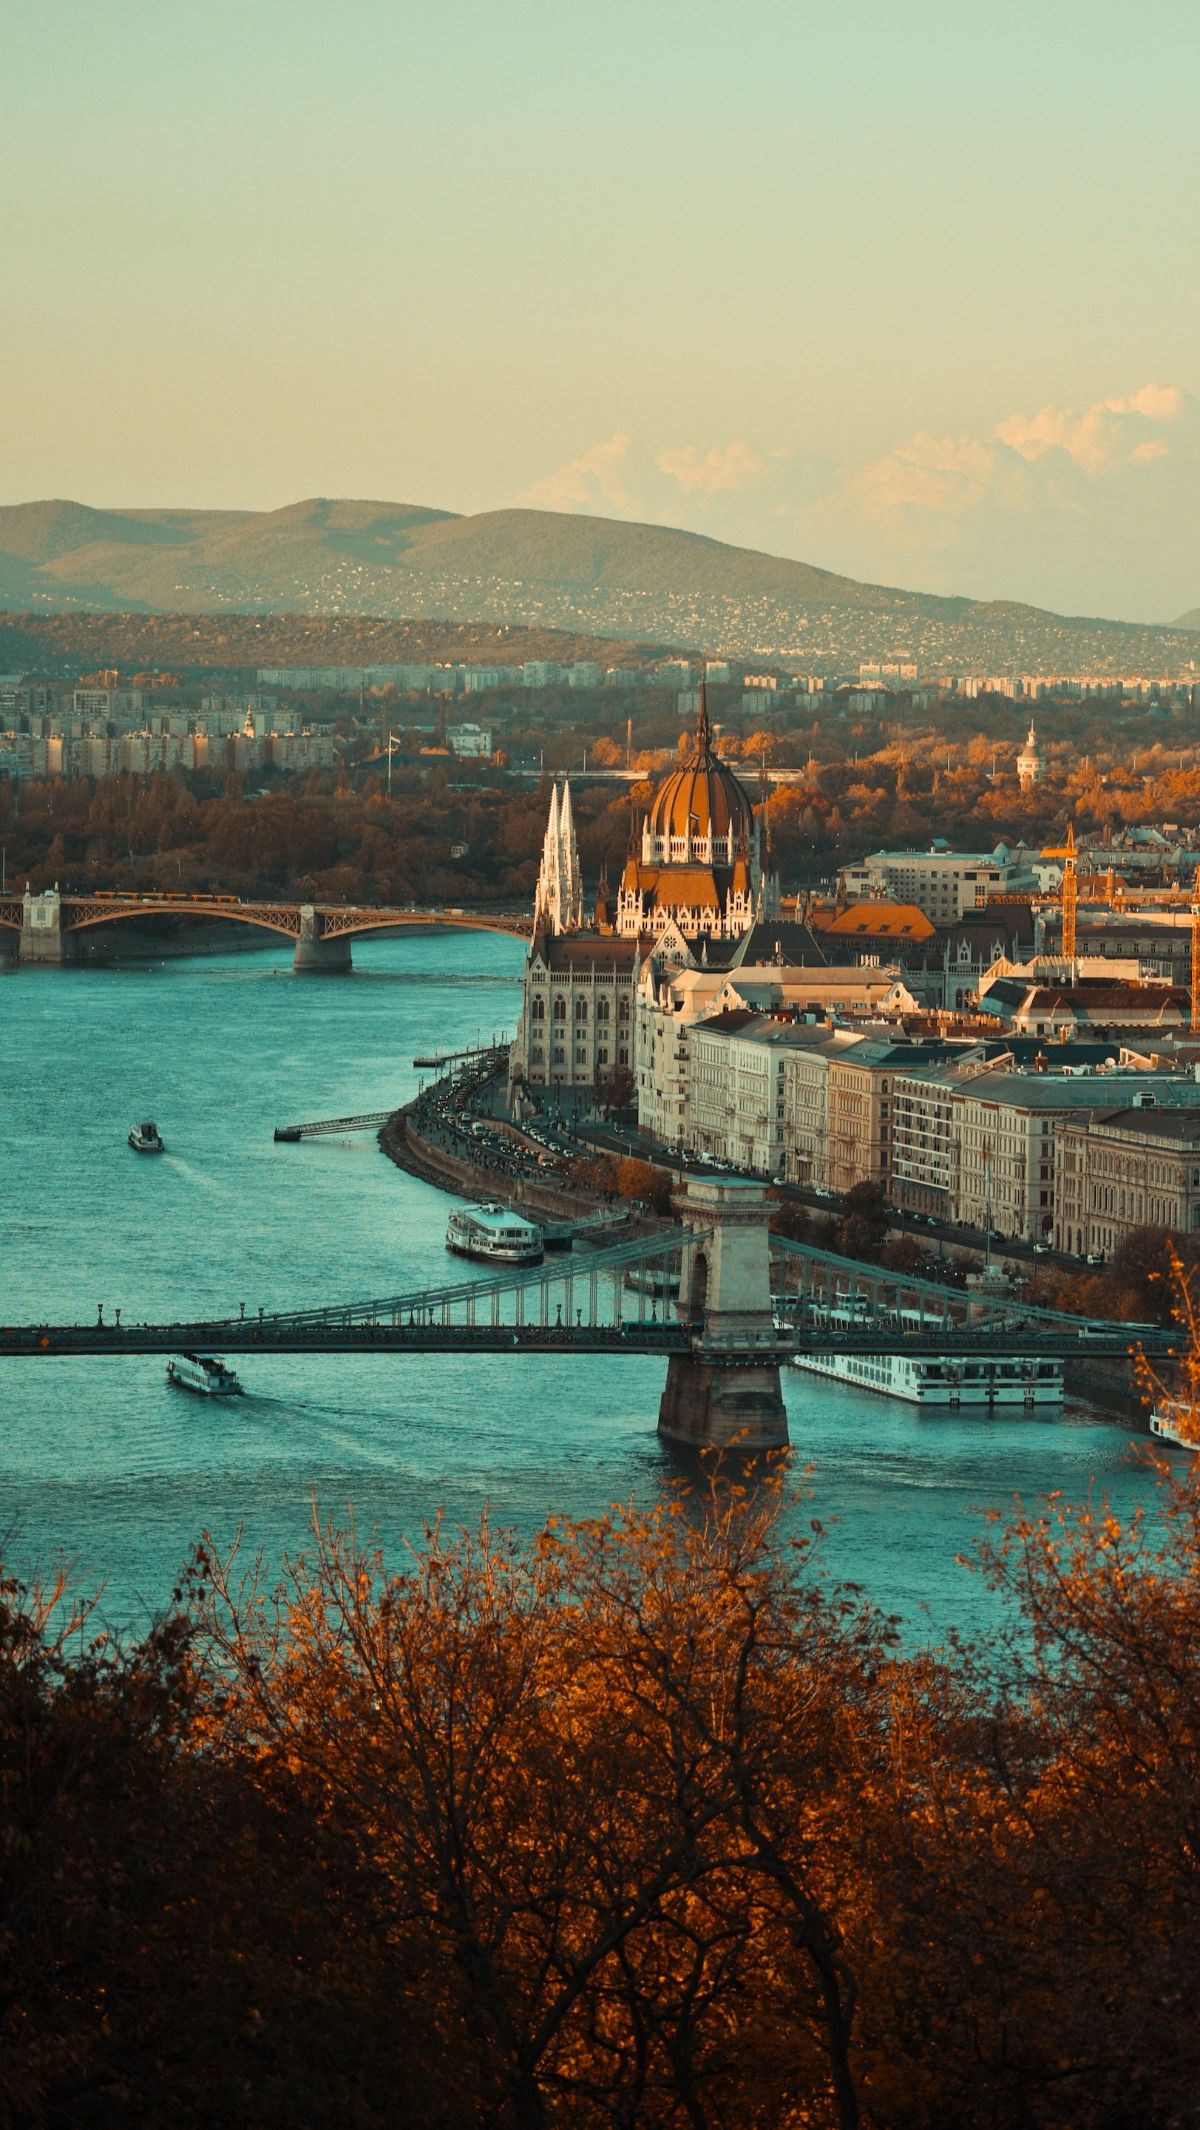 4. Budapest, Hungary: The Pearl of the Danube